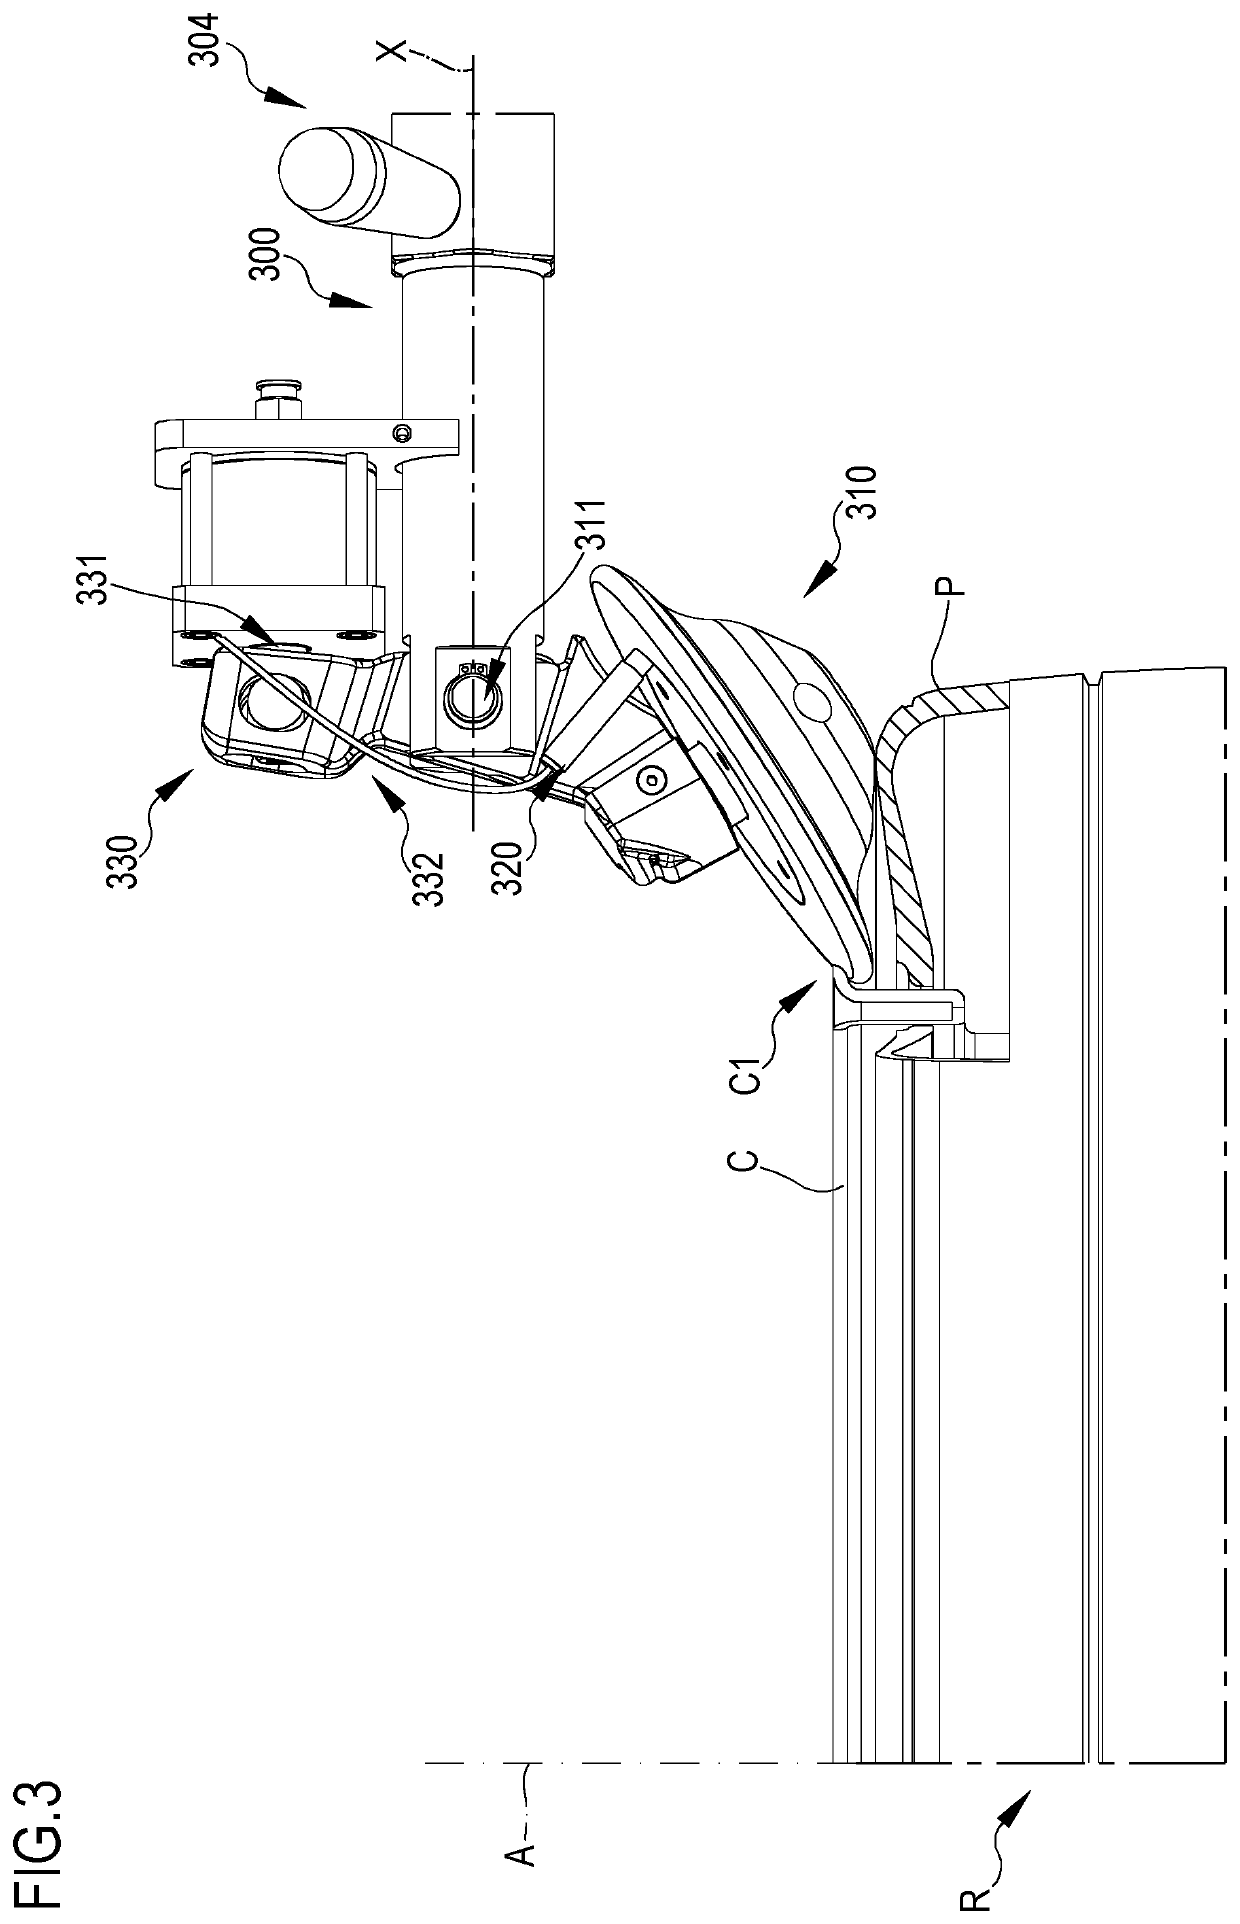 Tyre-removal apparatus with automatically pivoting tool